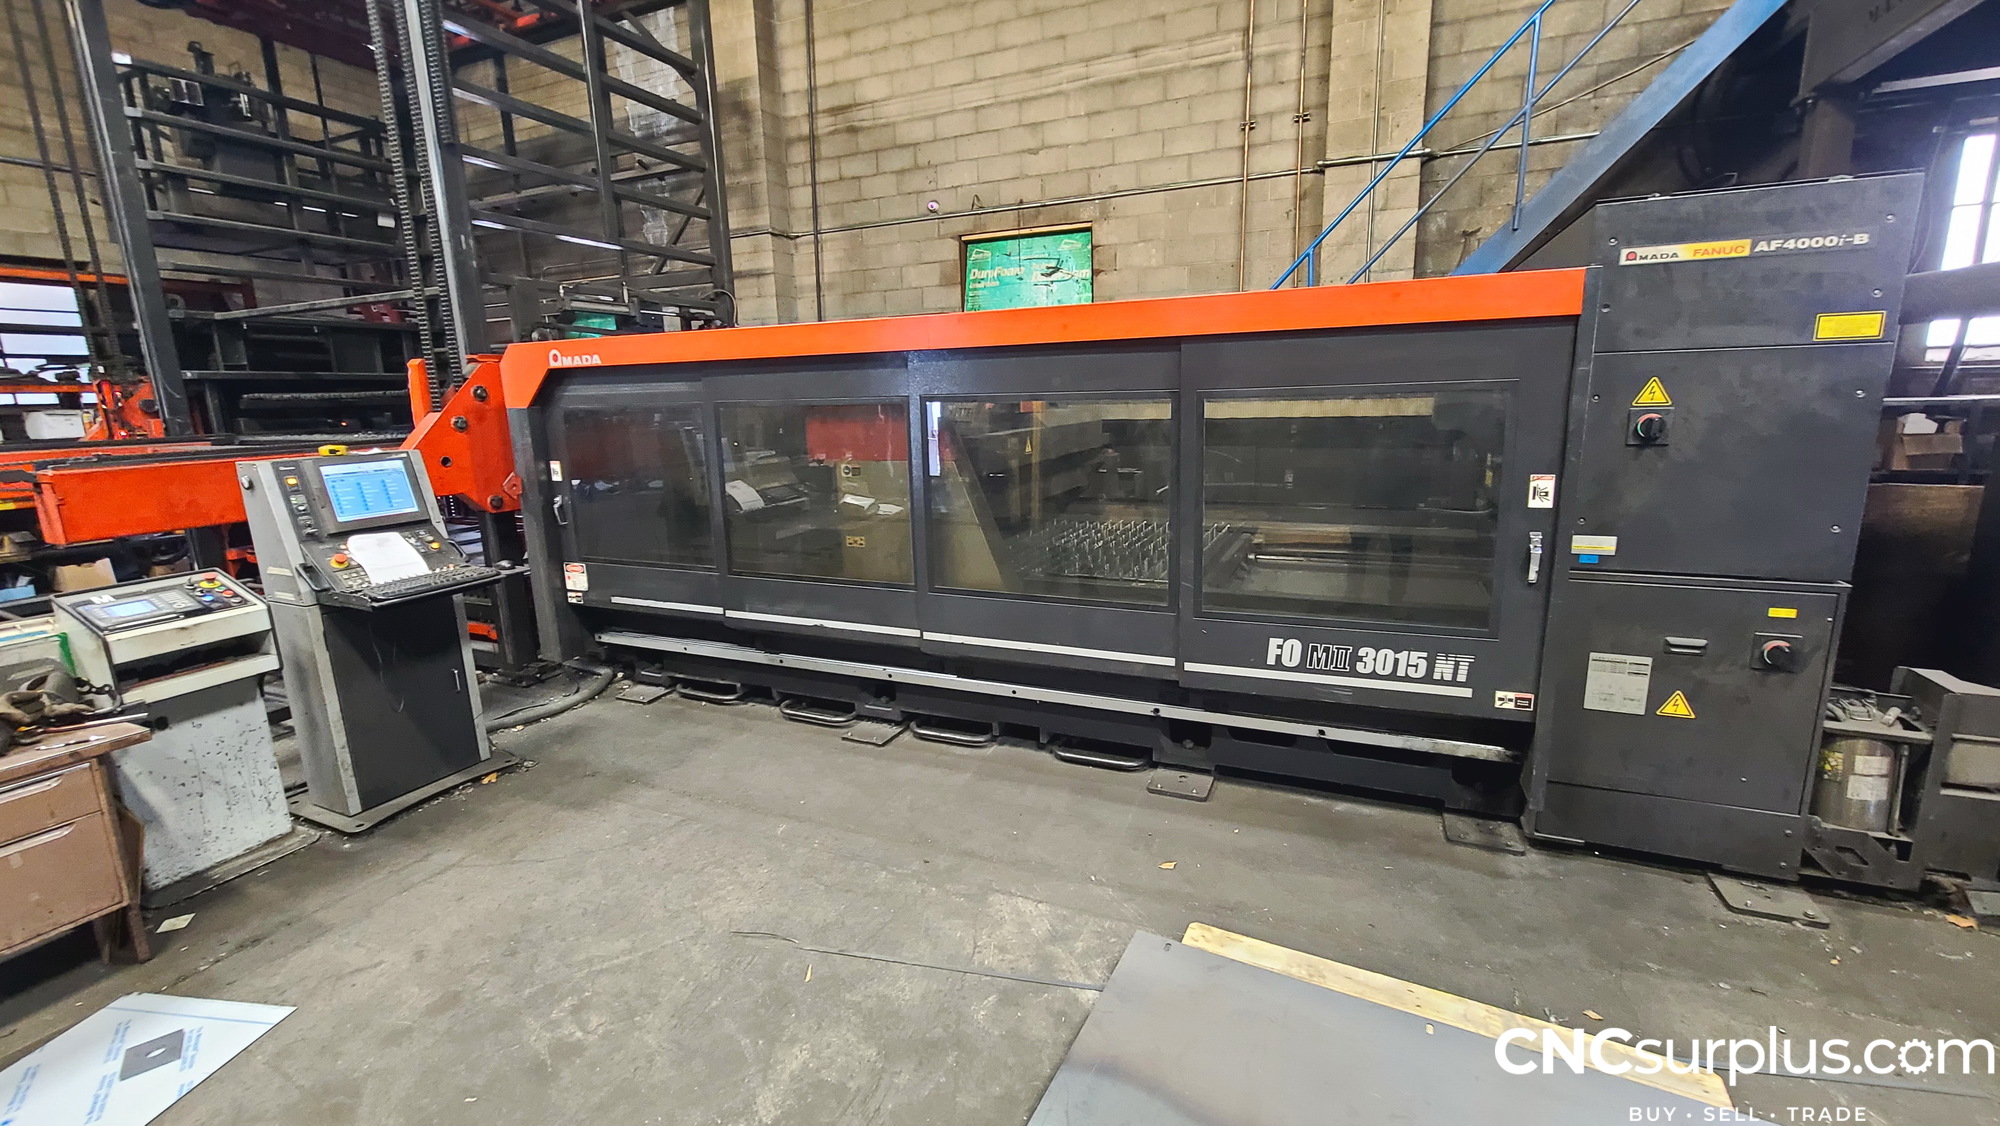 2011 AMADA FOM2-3015 NT Laser Cutters | CNCsurplus, A Div. of Comtex Leasing Corp.